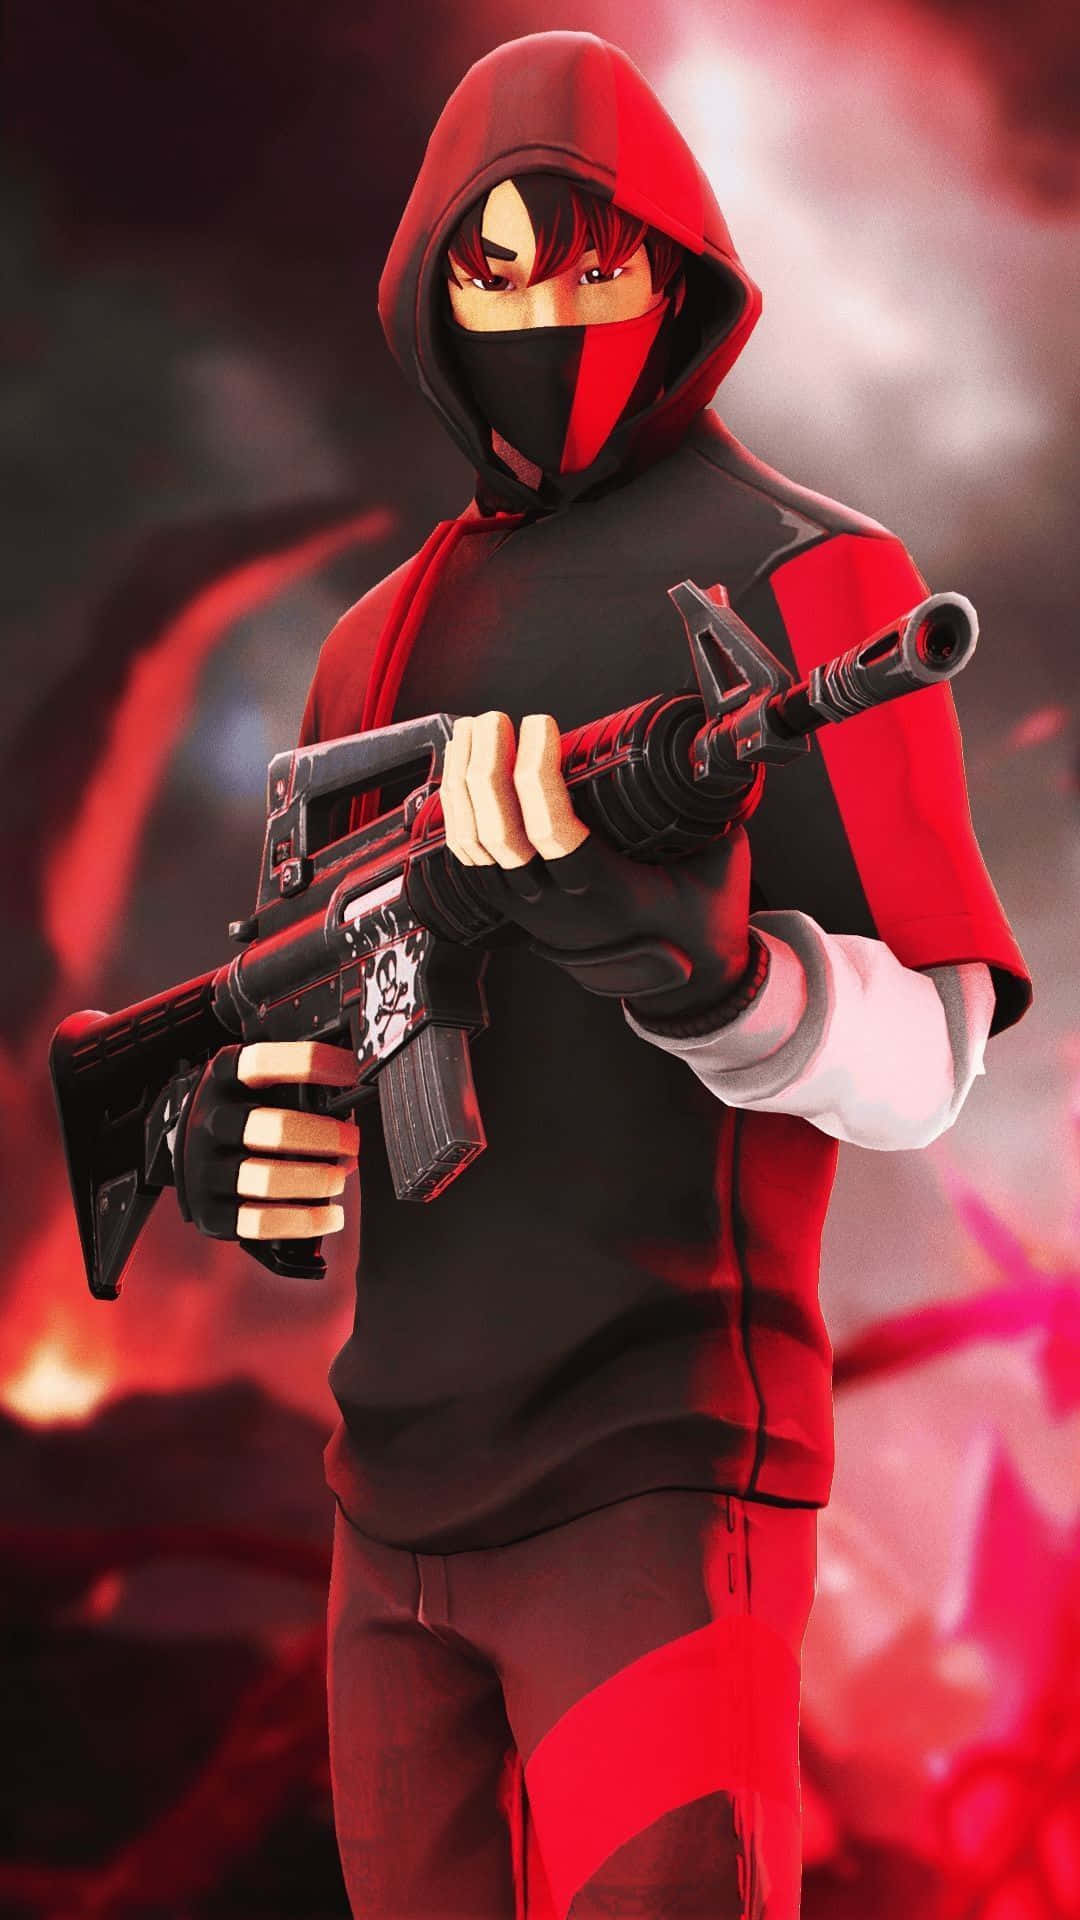 Make a statement with the Ruby Skin and stand out in Fortnite Wallpaper